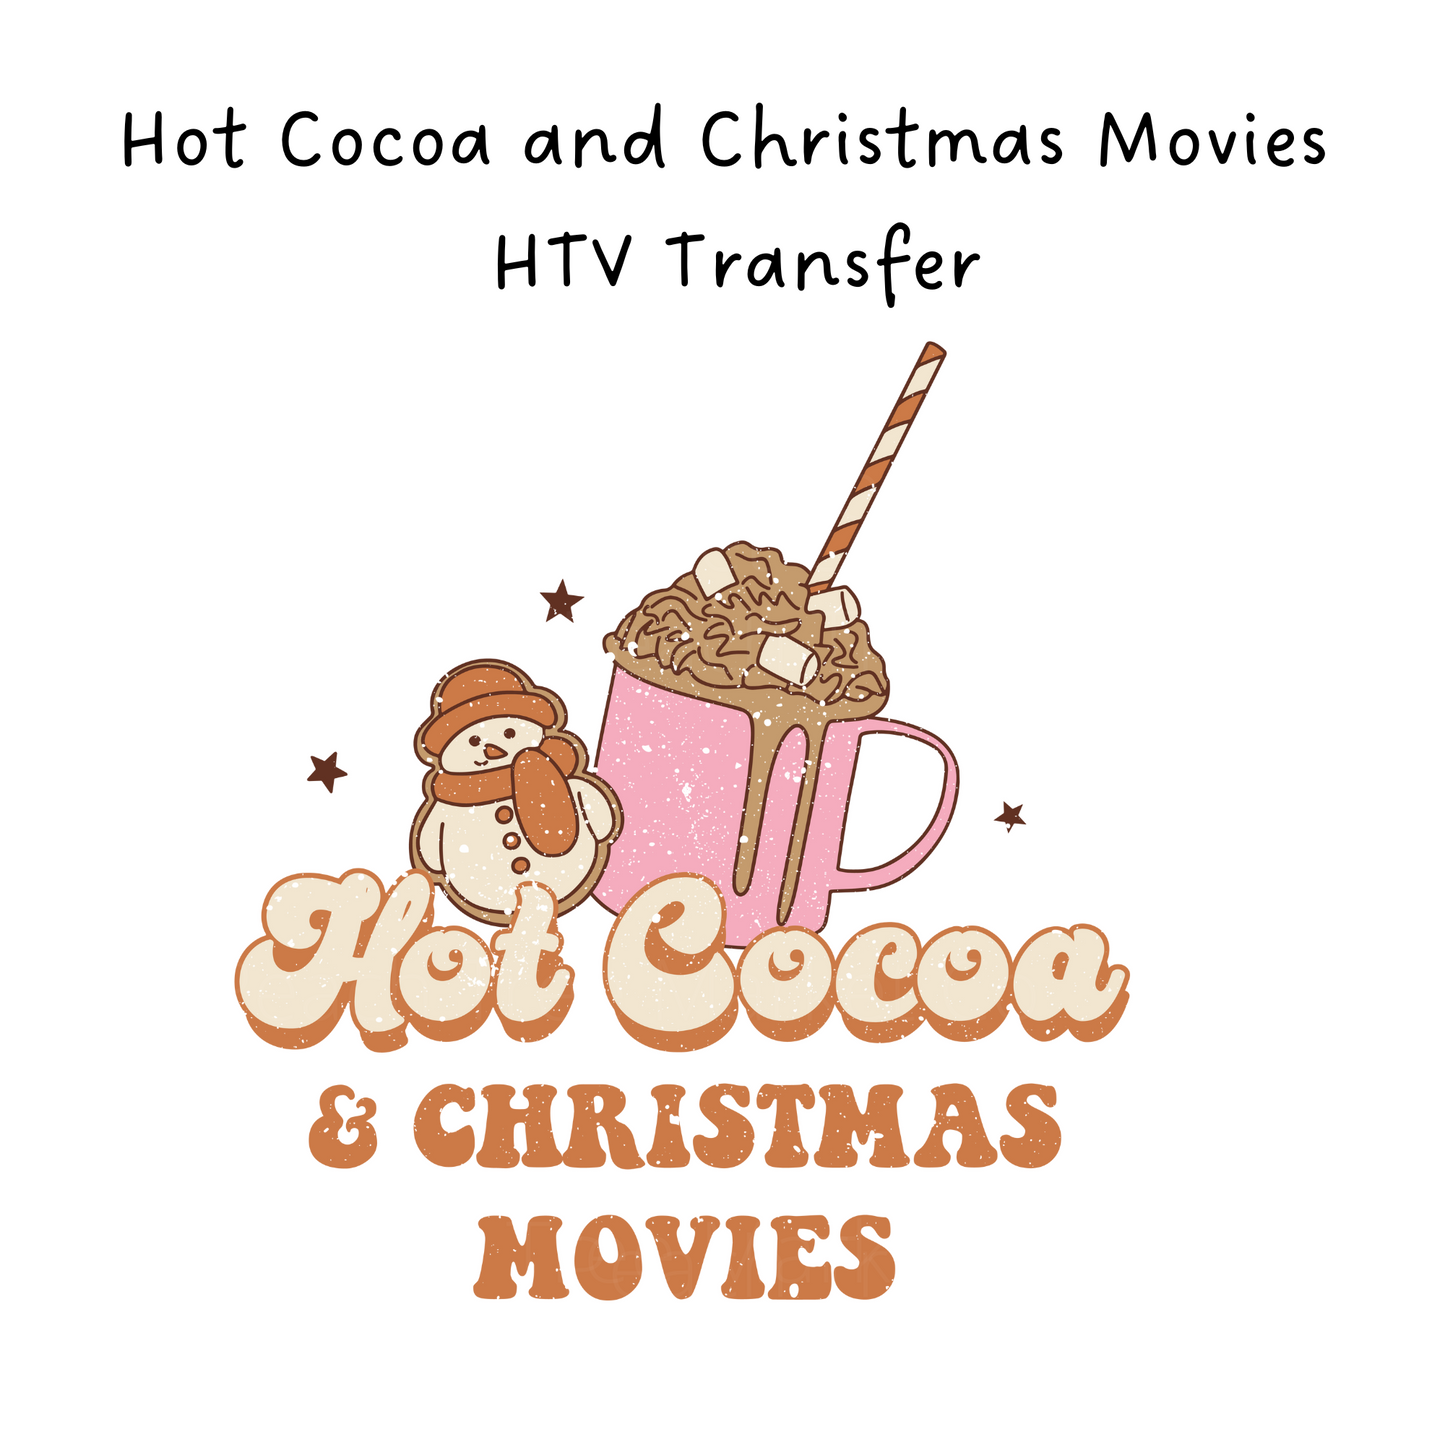 Hot Cocoa and Christmas Movies HTV Transfer